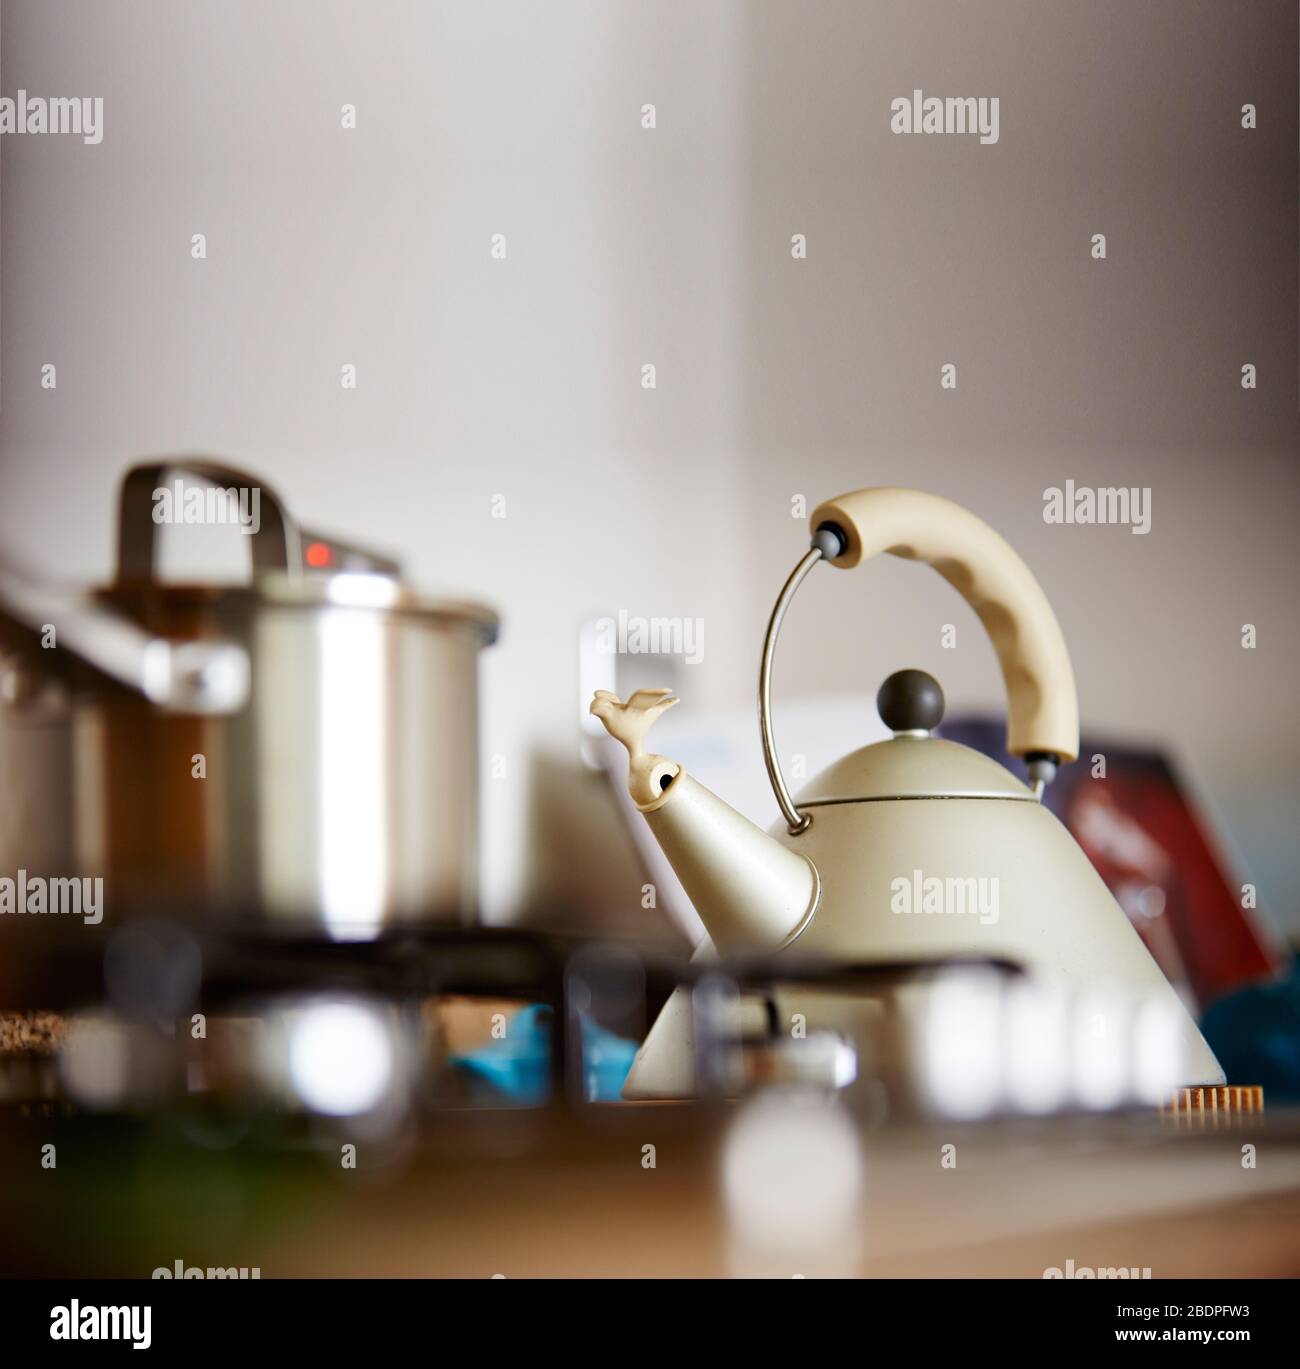 https://c8.alamy.com/comp/2BDPFW3/shot-of-a-kettle-steaming-on-a-gas-burner-stove-in-kitchen-2BDPFW3.jpg